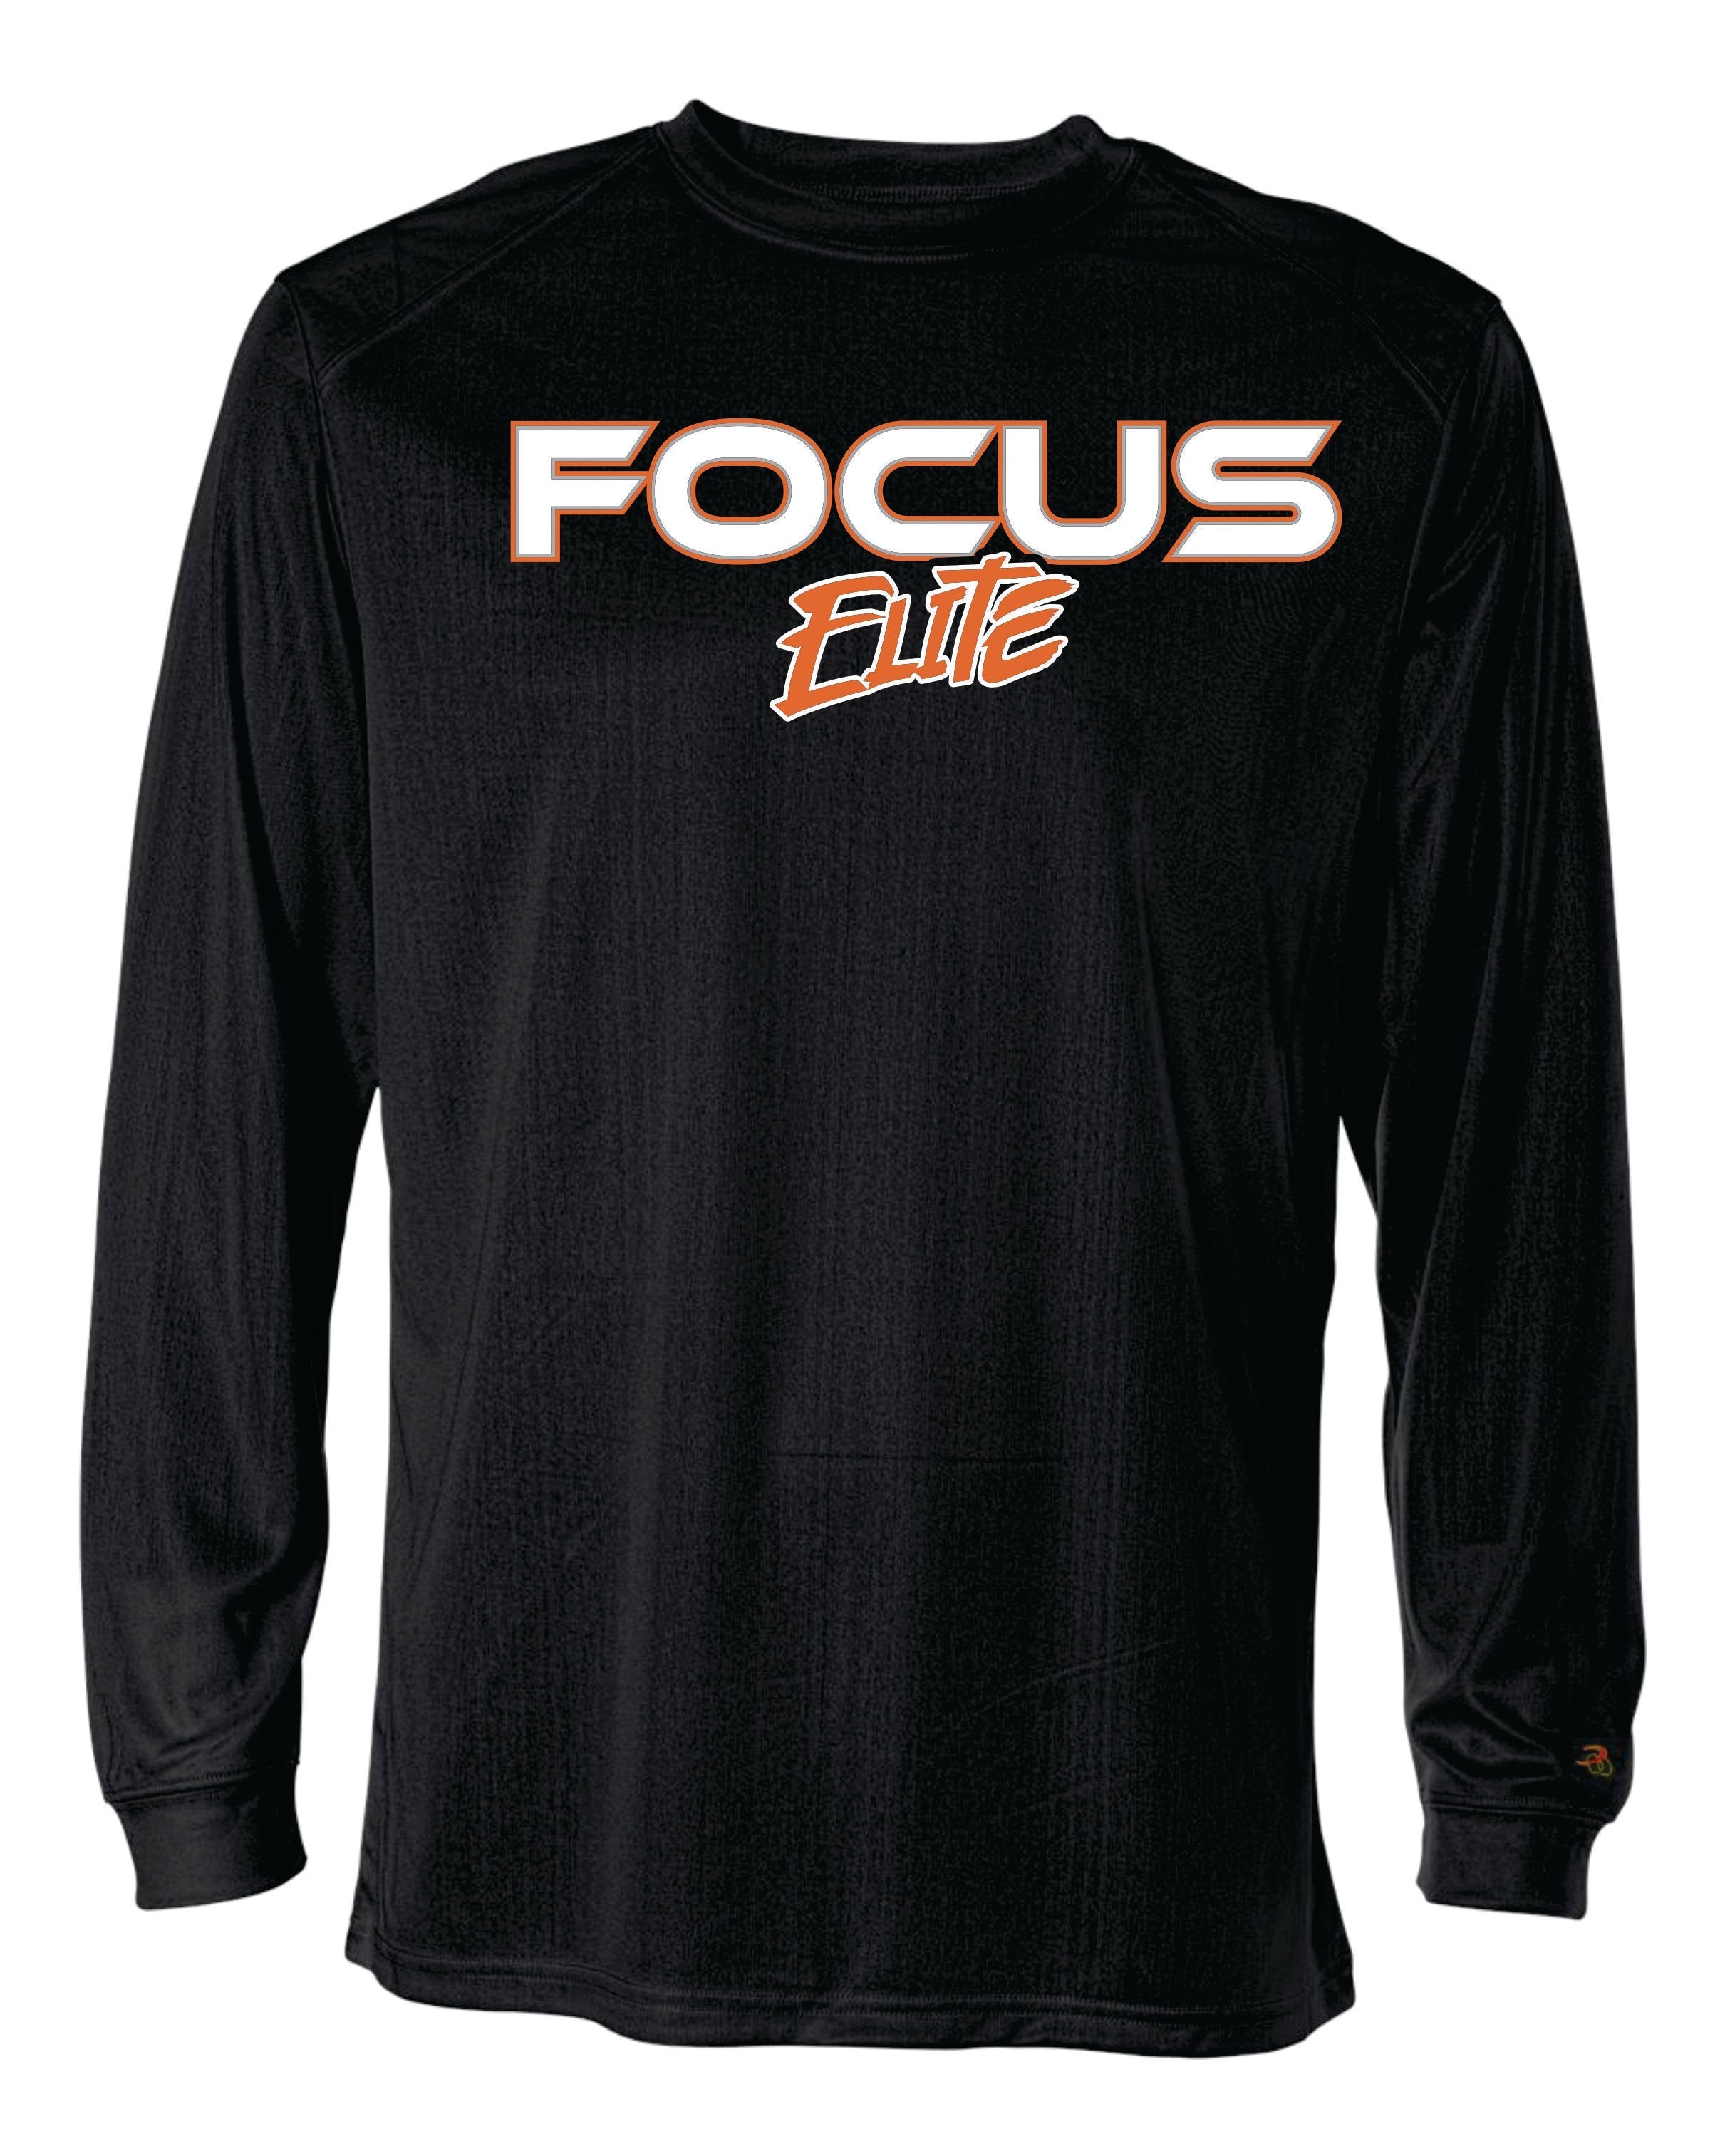 Focus Long Sleeve Dri Fit-YOUTH